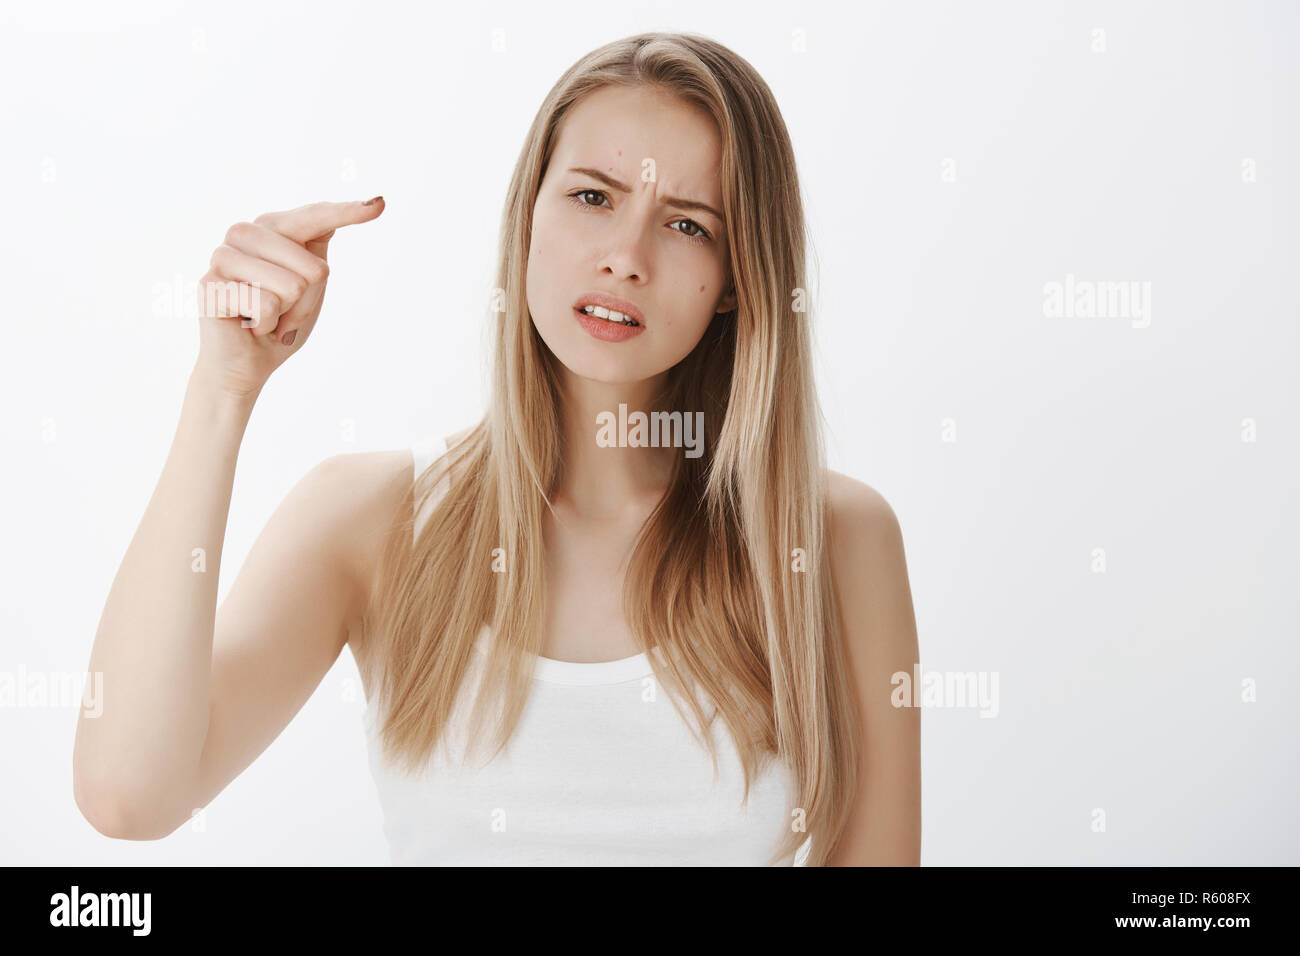 Girl blaming friend for hurting her feelings, being offended and hurt, pointing at camera as accusing someone frowning and squinting, sad as mate let  Stock Photo